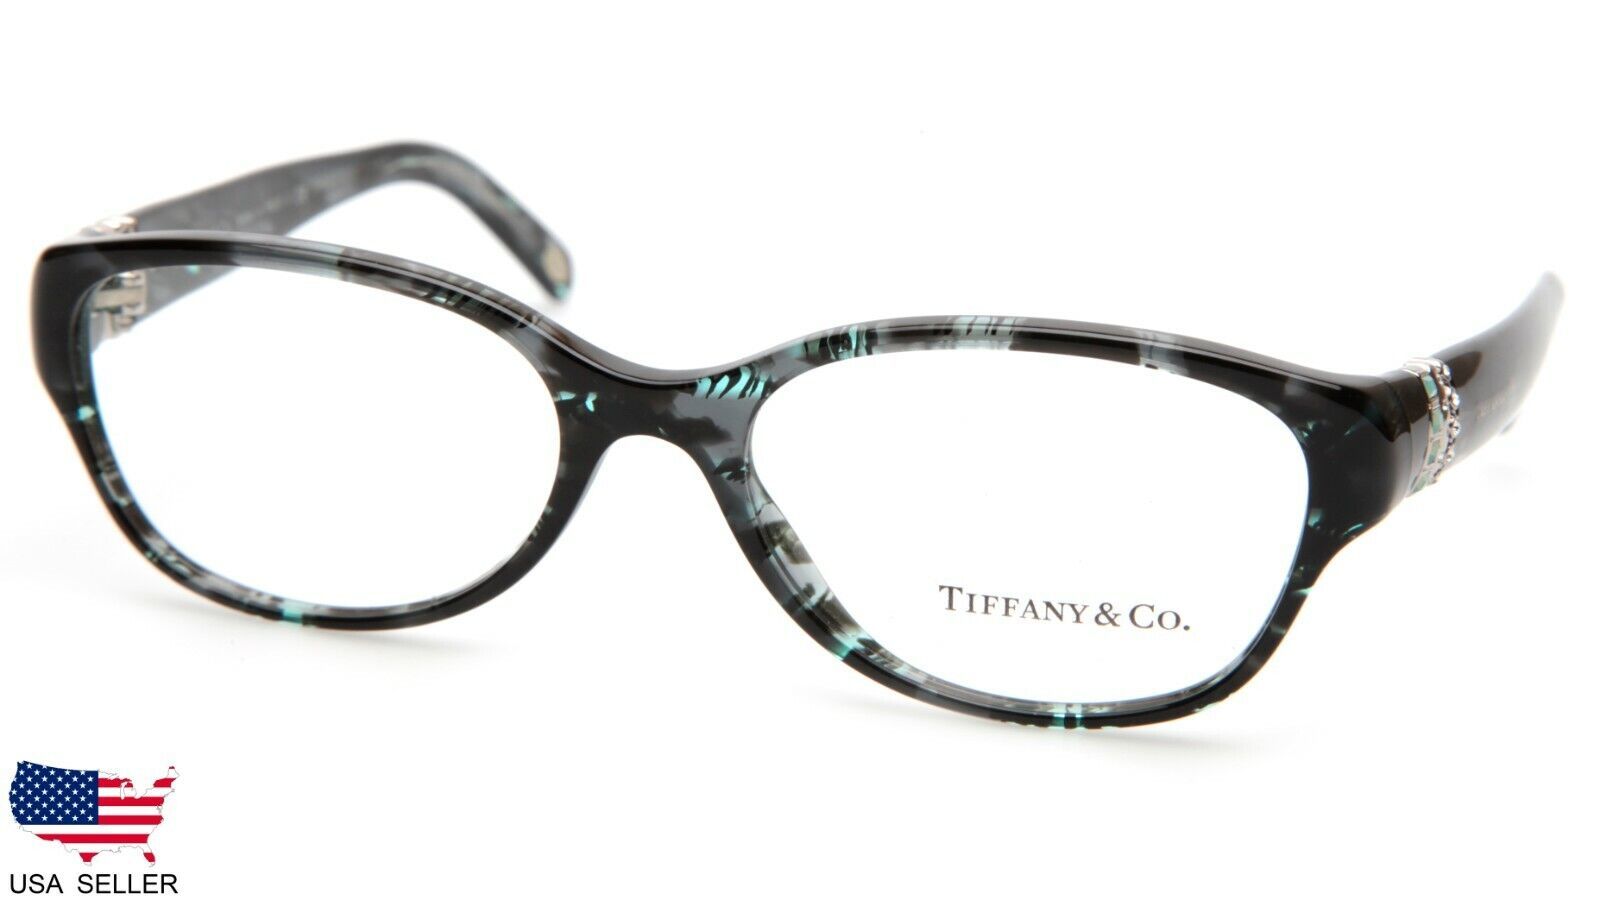 Primary image for NEW TIFFANY & Co. TF 2082-B 8129 GREY TURQUOISE EYEGLASSES FRAME 53-17-135 B35mm